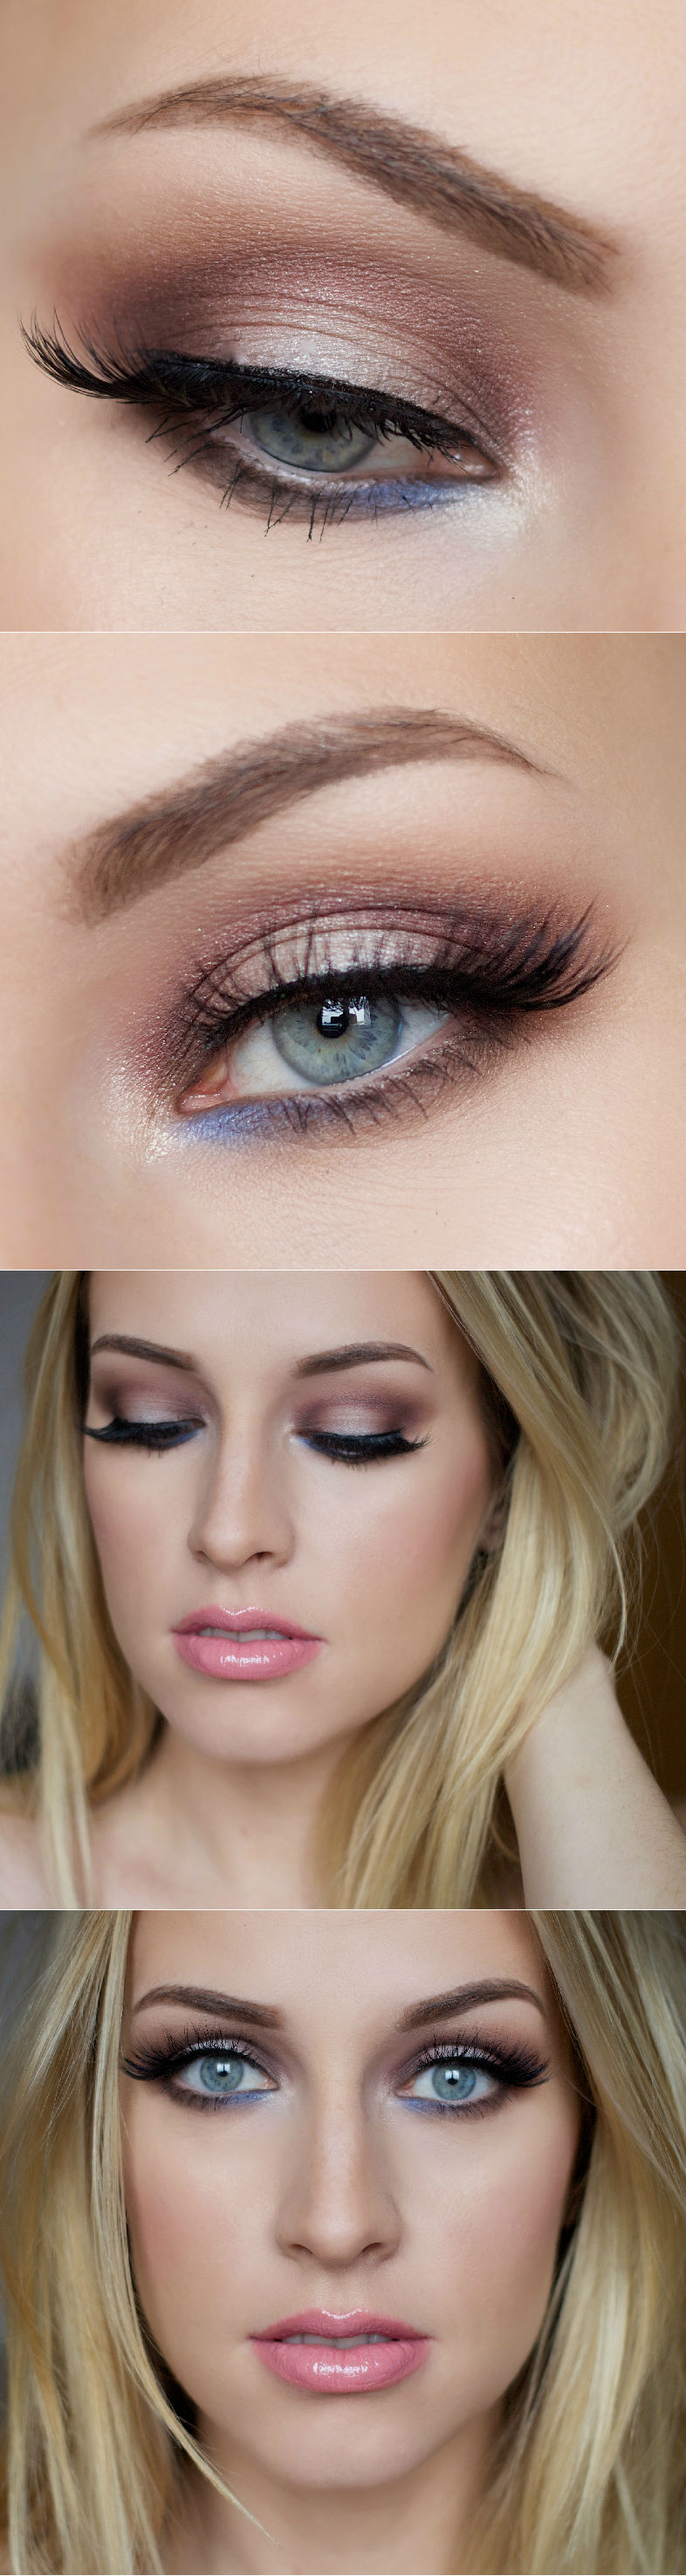 Bold Eye Makeup 5 Ways To Make Blue Eyes Pop With Proper Eye Makeup Her Style Code